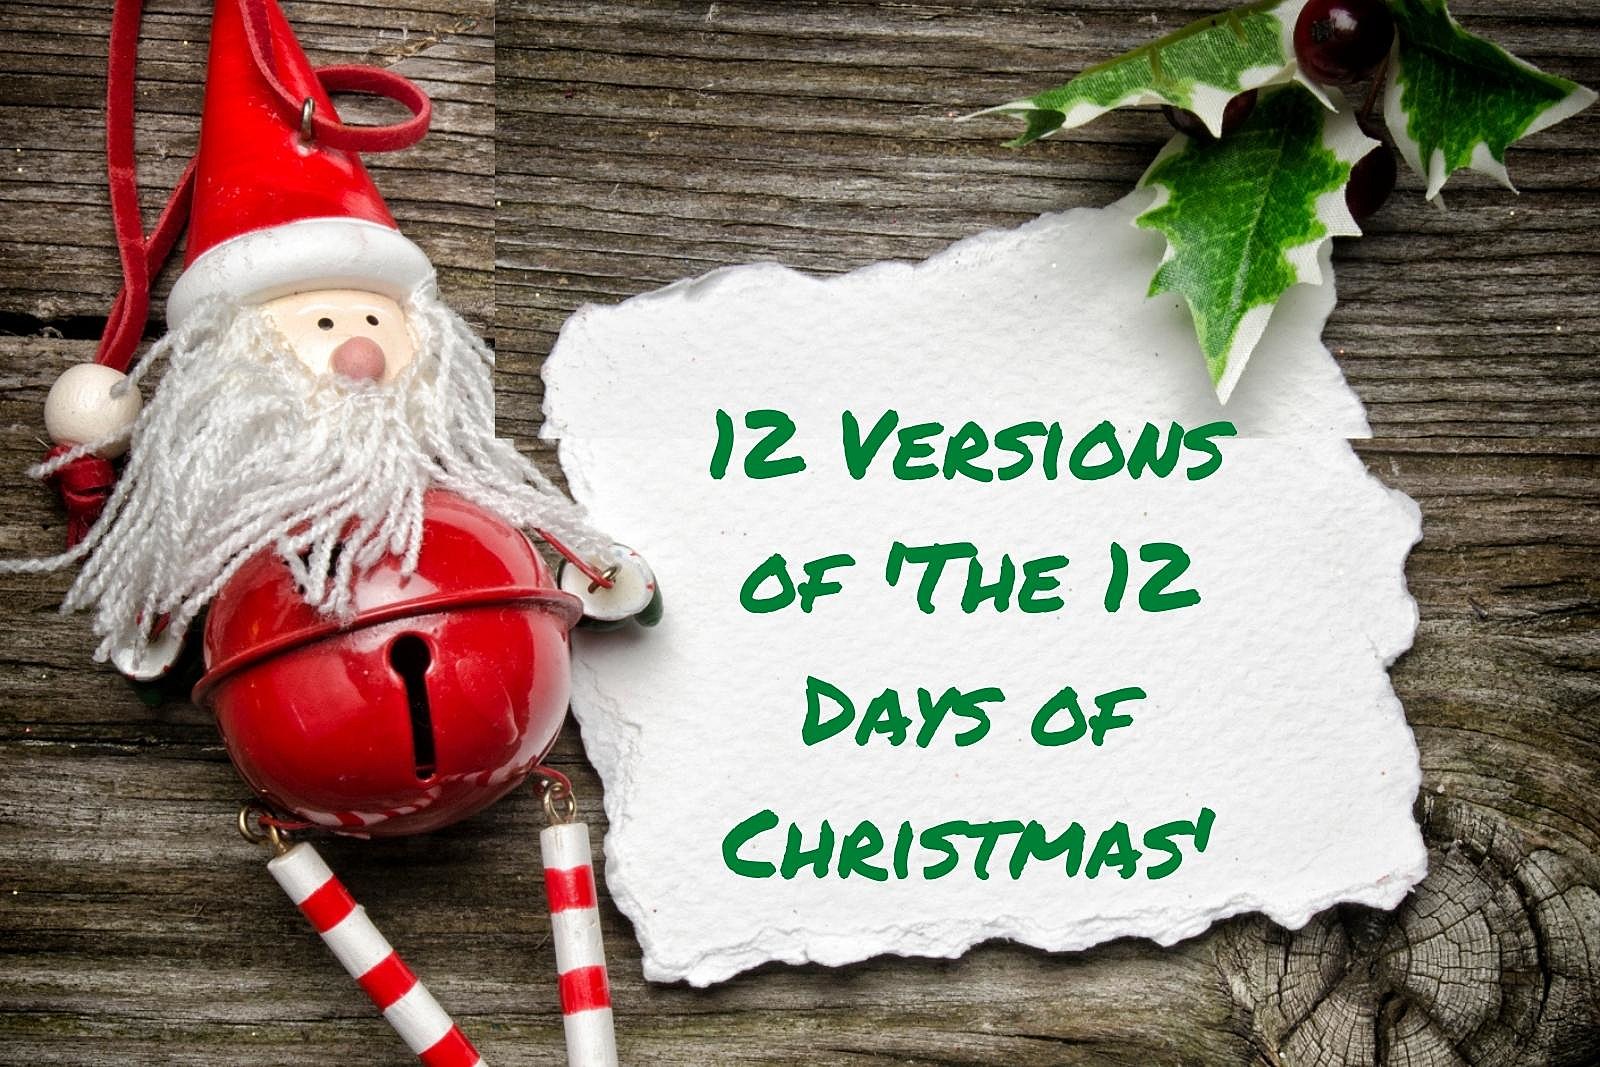 12 Versions of 'The 12 Days of Christmas'